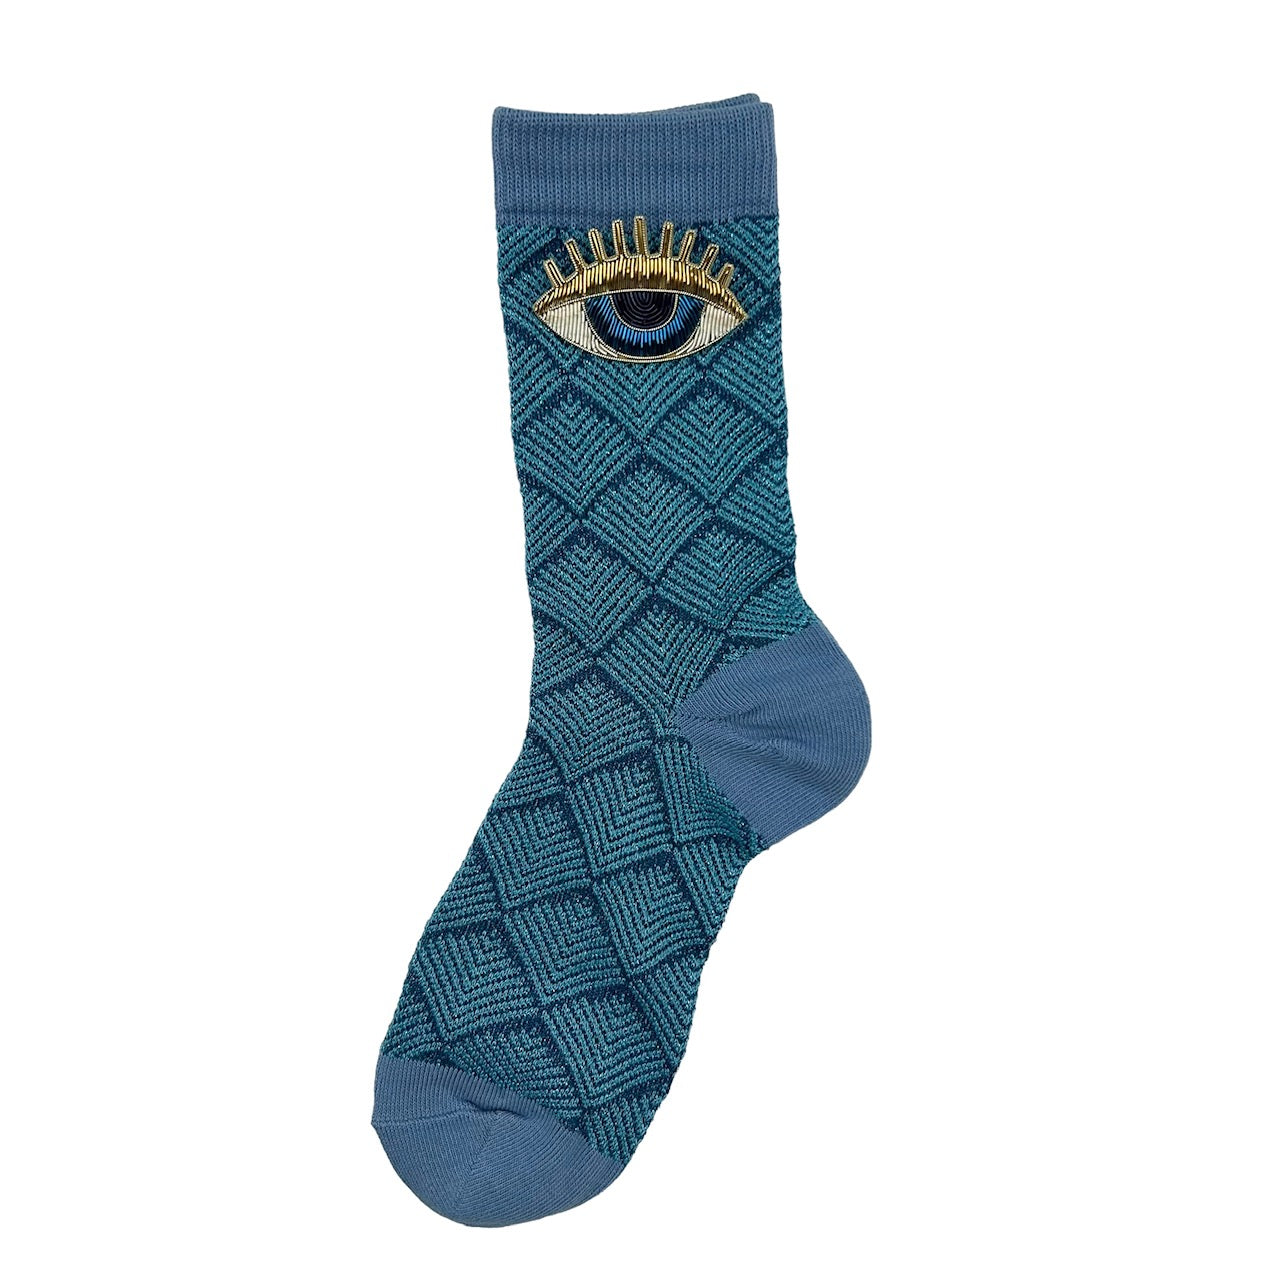 Paris socks in blue with a golden lashes brooch